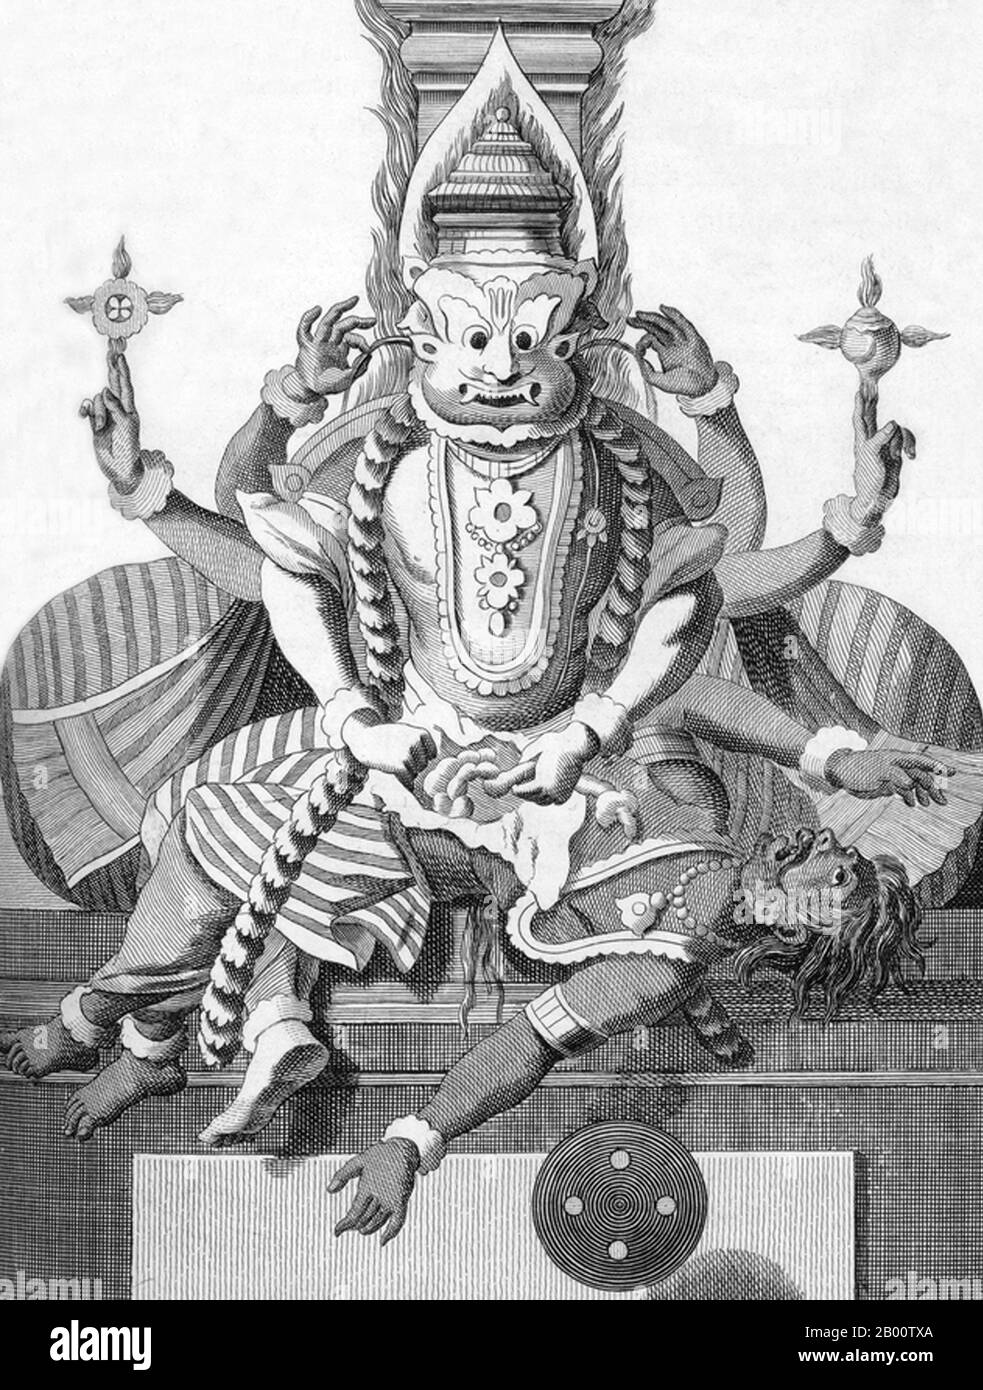 India: 'Fourth Avatar (Incarnation) of Vishnu as Narasimha, the Lion Man'. Illustration by Pierre Sonnerat (1748-1814), 1782.  Pierre Sonnerat (1748-1814) was a French naturalist and explorer who made several voyages to southeast Asia between 1769 and 1781. He published this two-volume account of his voyage of 1774-81 in 1782.  Volume 1 deals exclusively with India, whose culture Sonnerat very much admired, and is especially noteworthy for its extended discussion of religion in India, Hinduism in particular. The book is illustrated with engravings based on Sonnerat’s drawings. Stock Photo